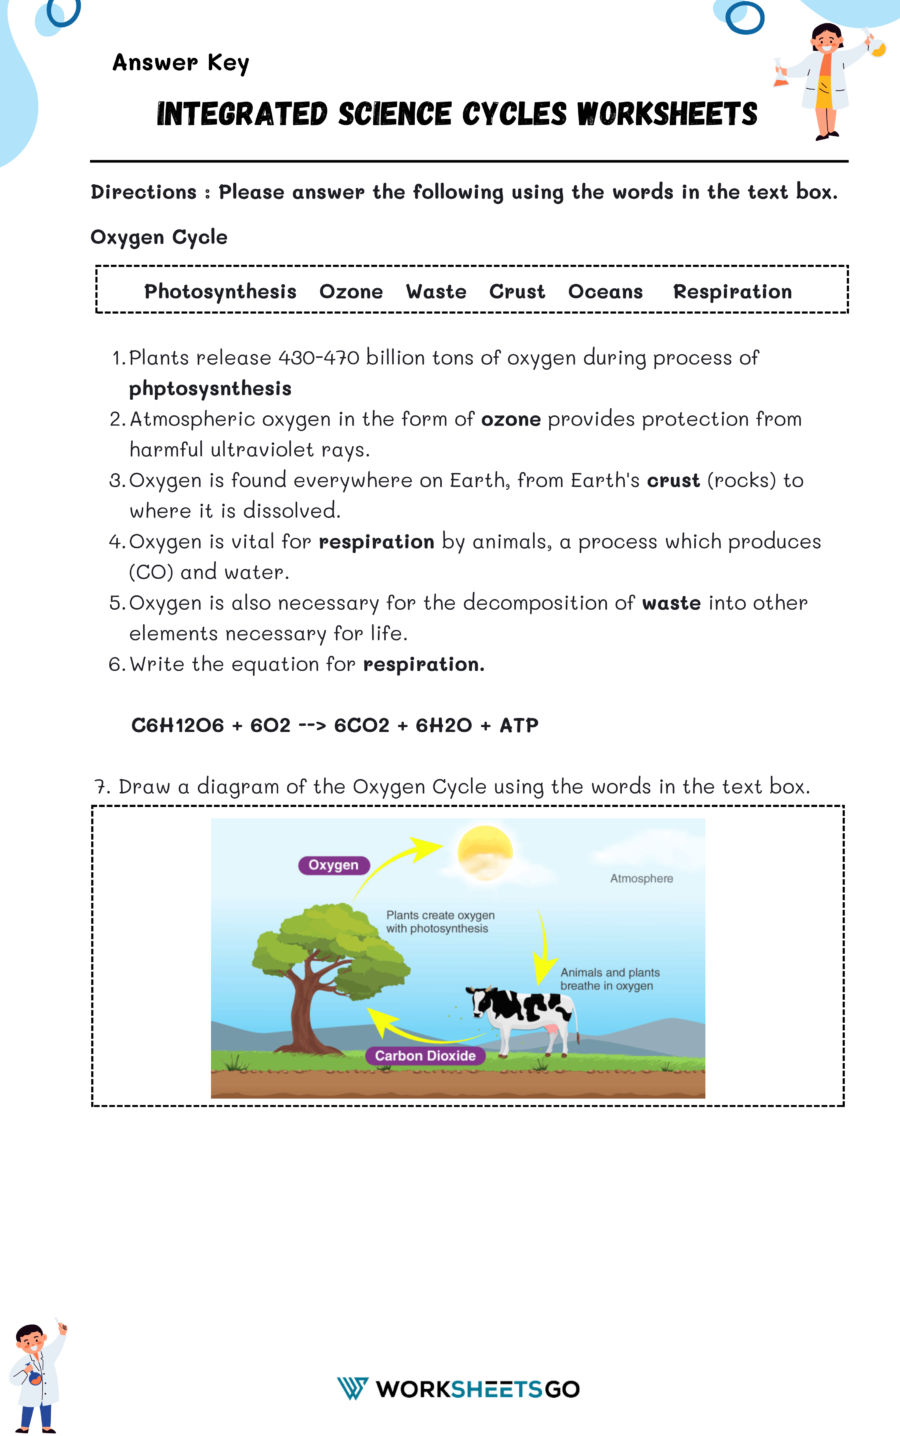 Integrated Science Cycles, Oxygen Cycle Worksheet Answer Key